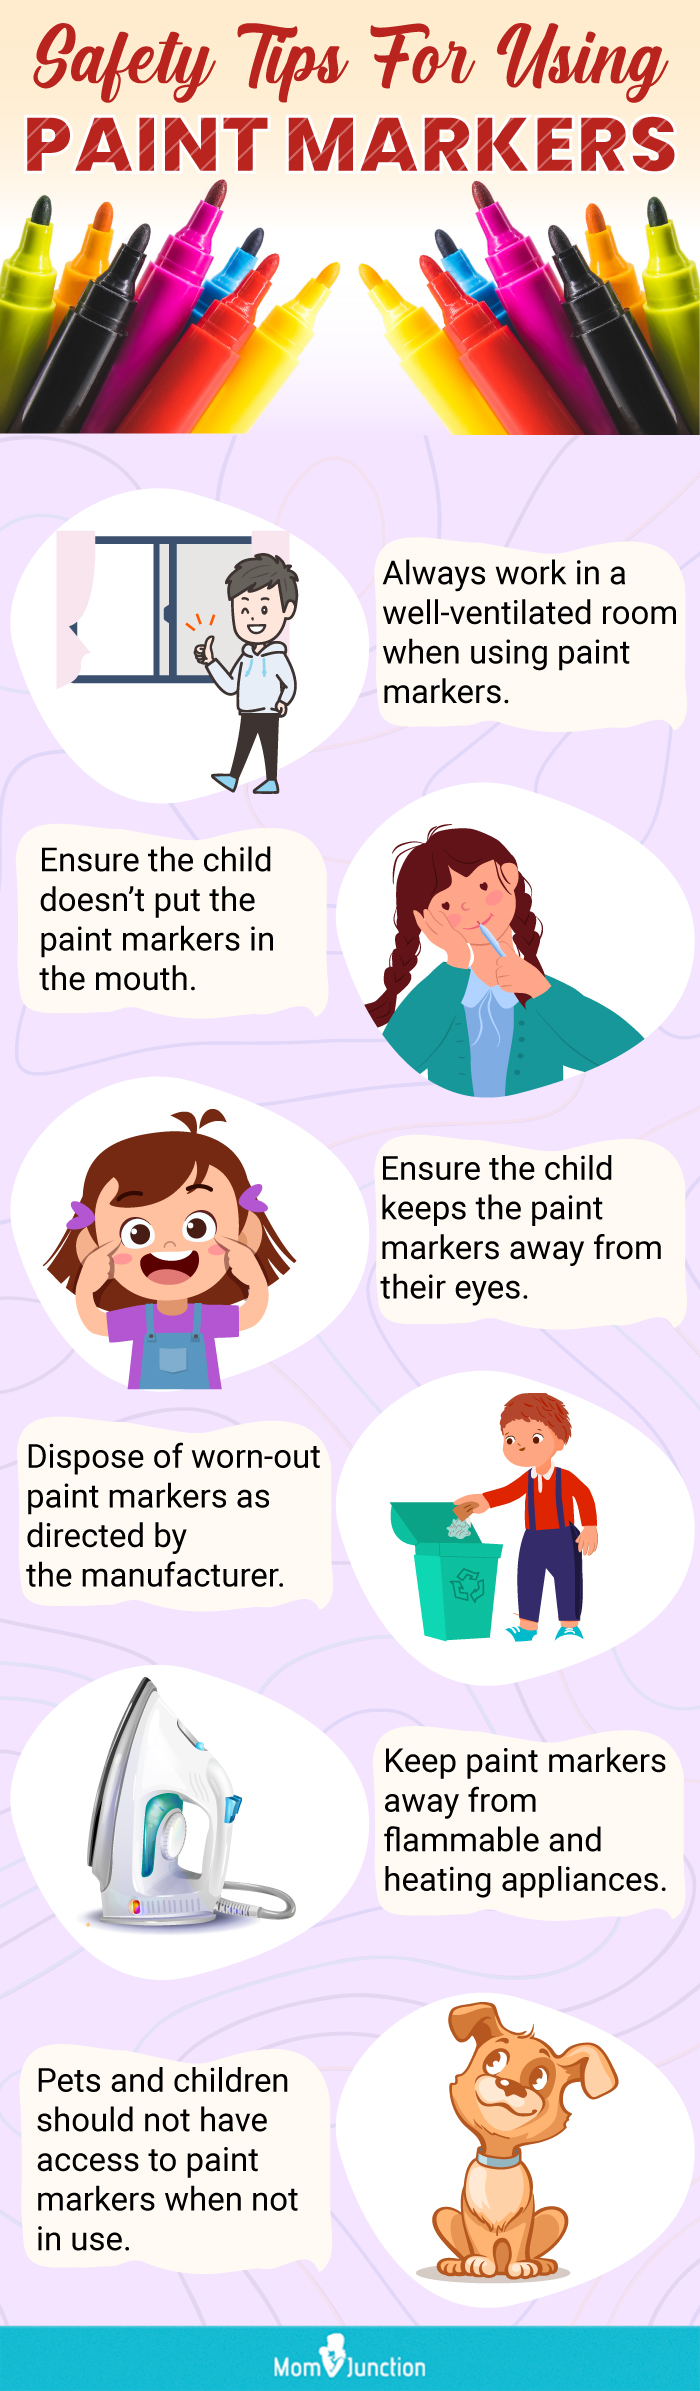 safety tips for using paints markers (infographic)